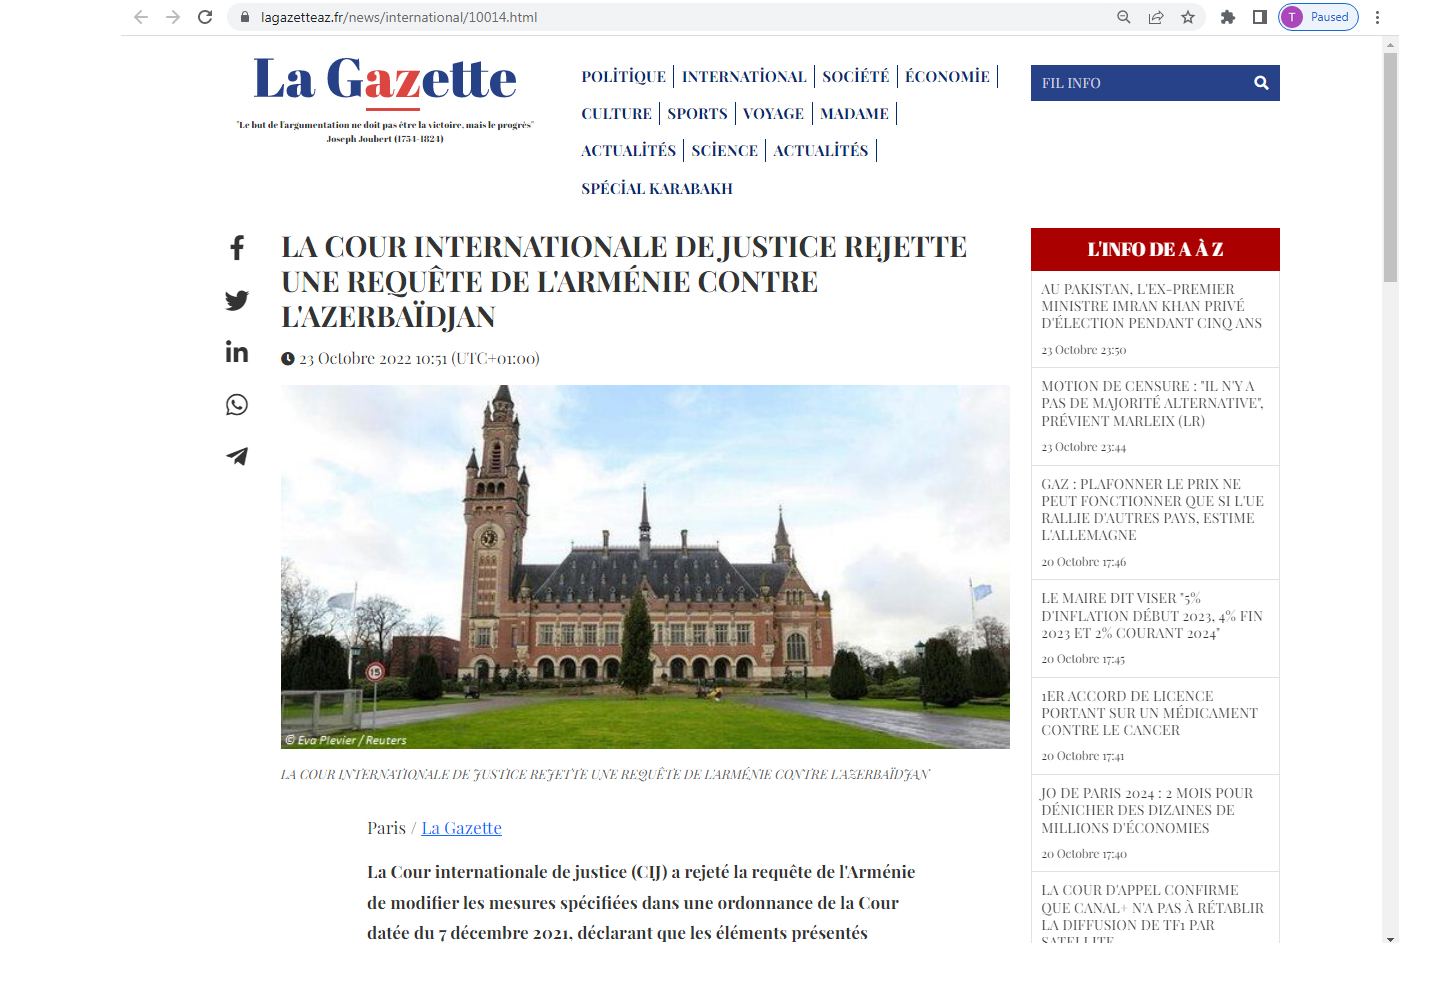 French press talks Int'l Court of Justice rejecting Armenia's request against Azerbaijan